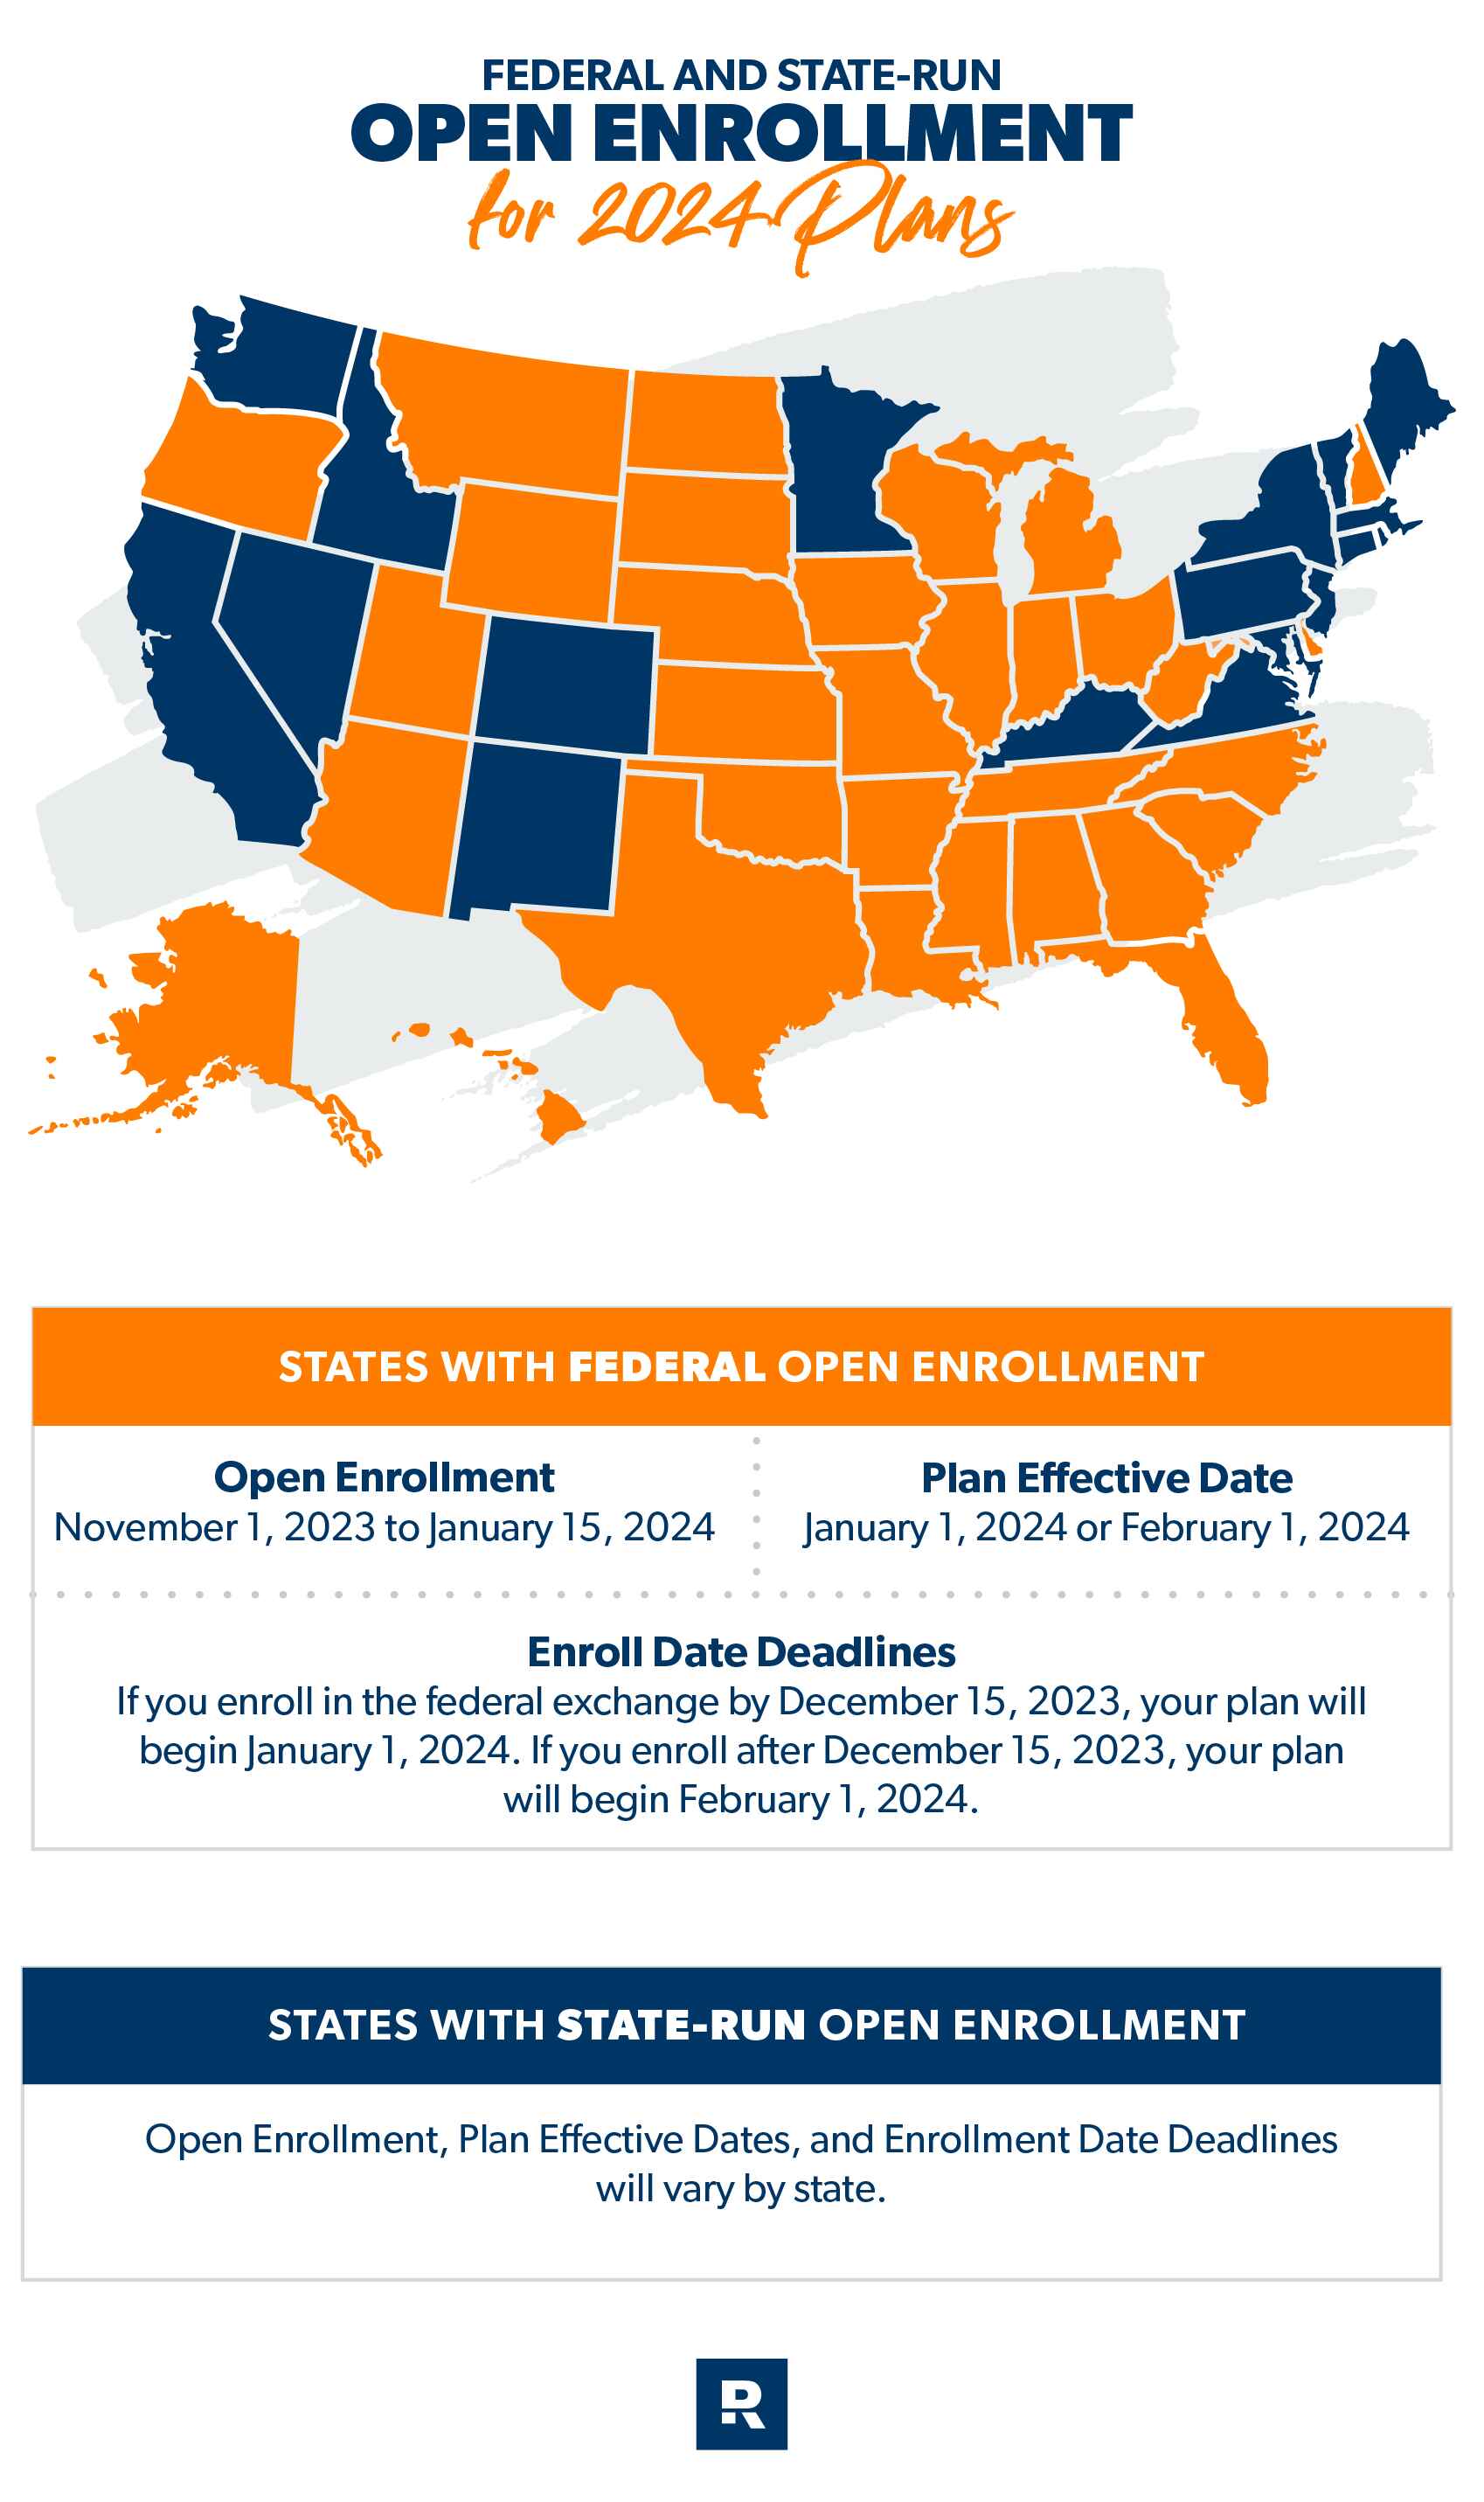 open enrollment states and dates